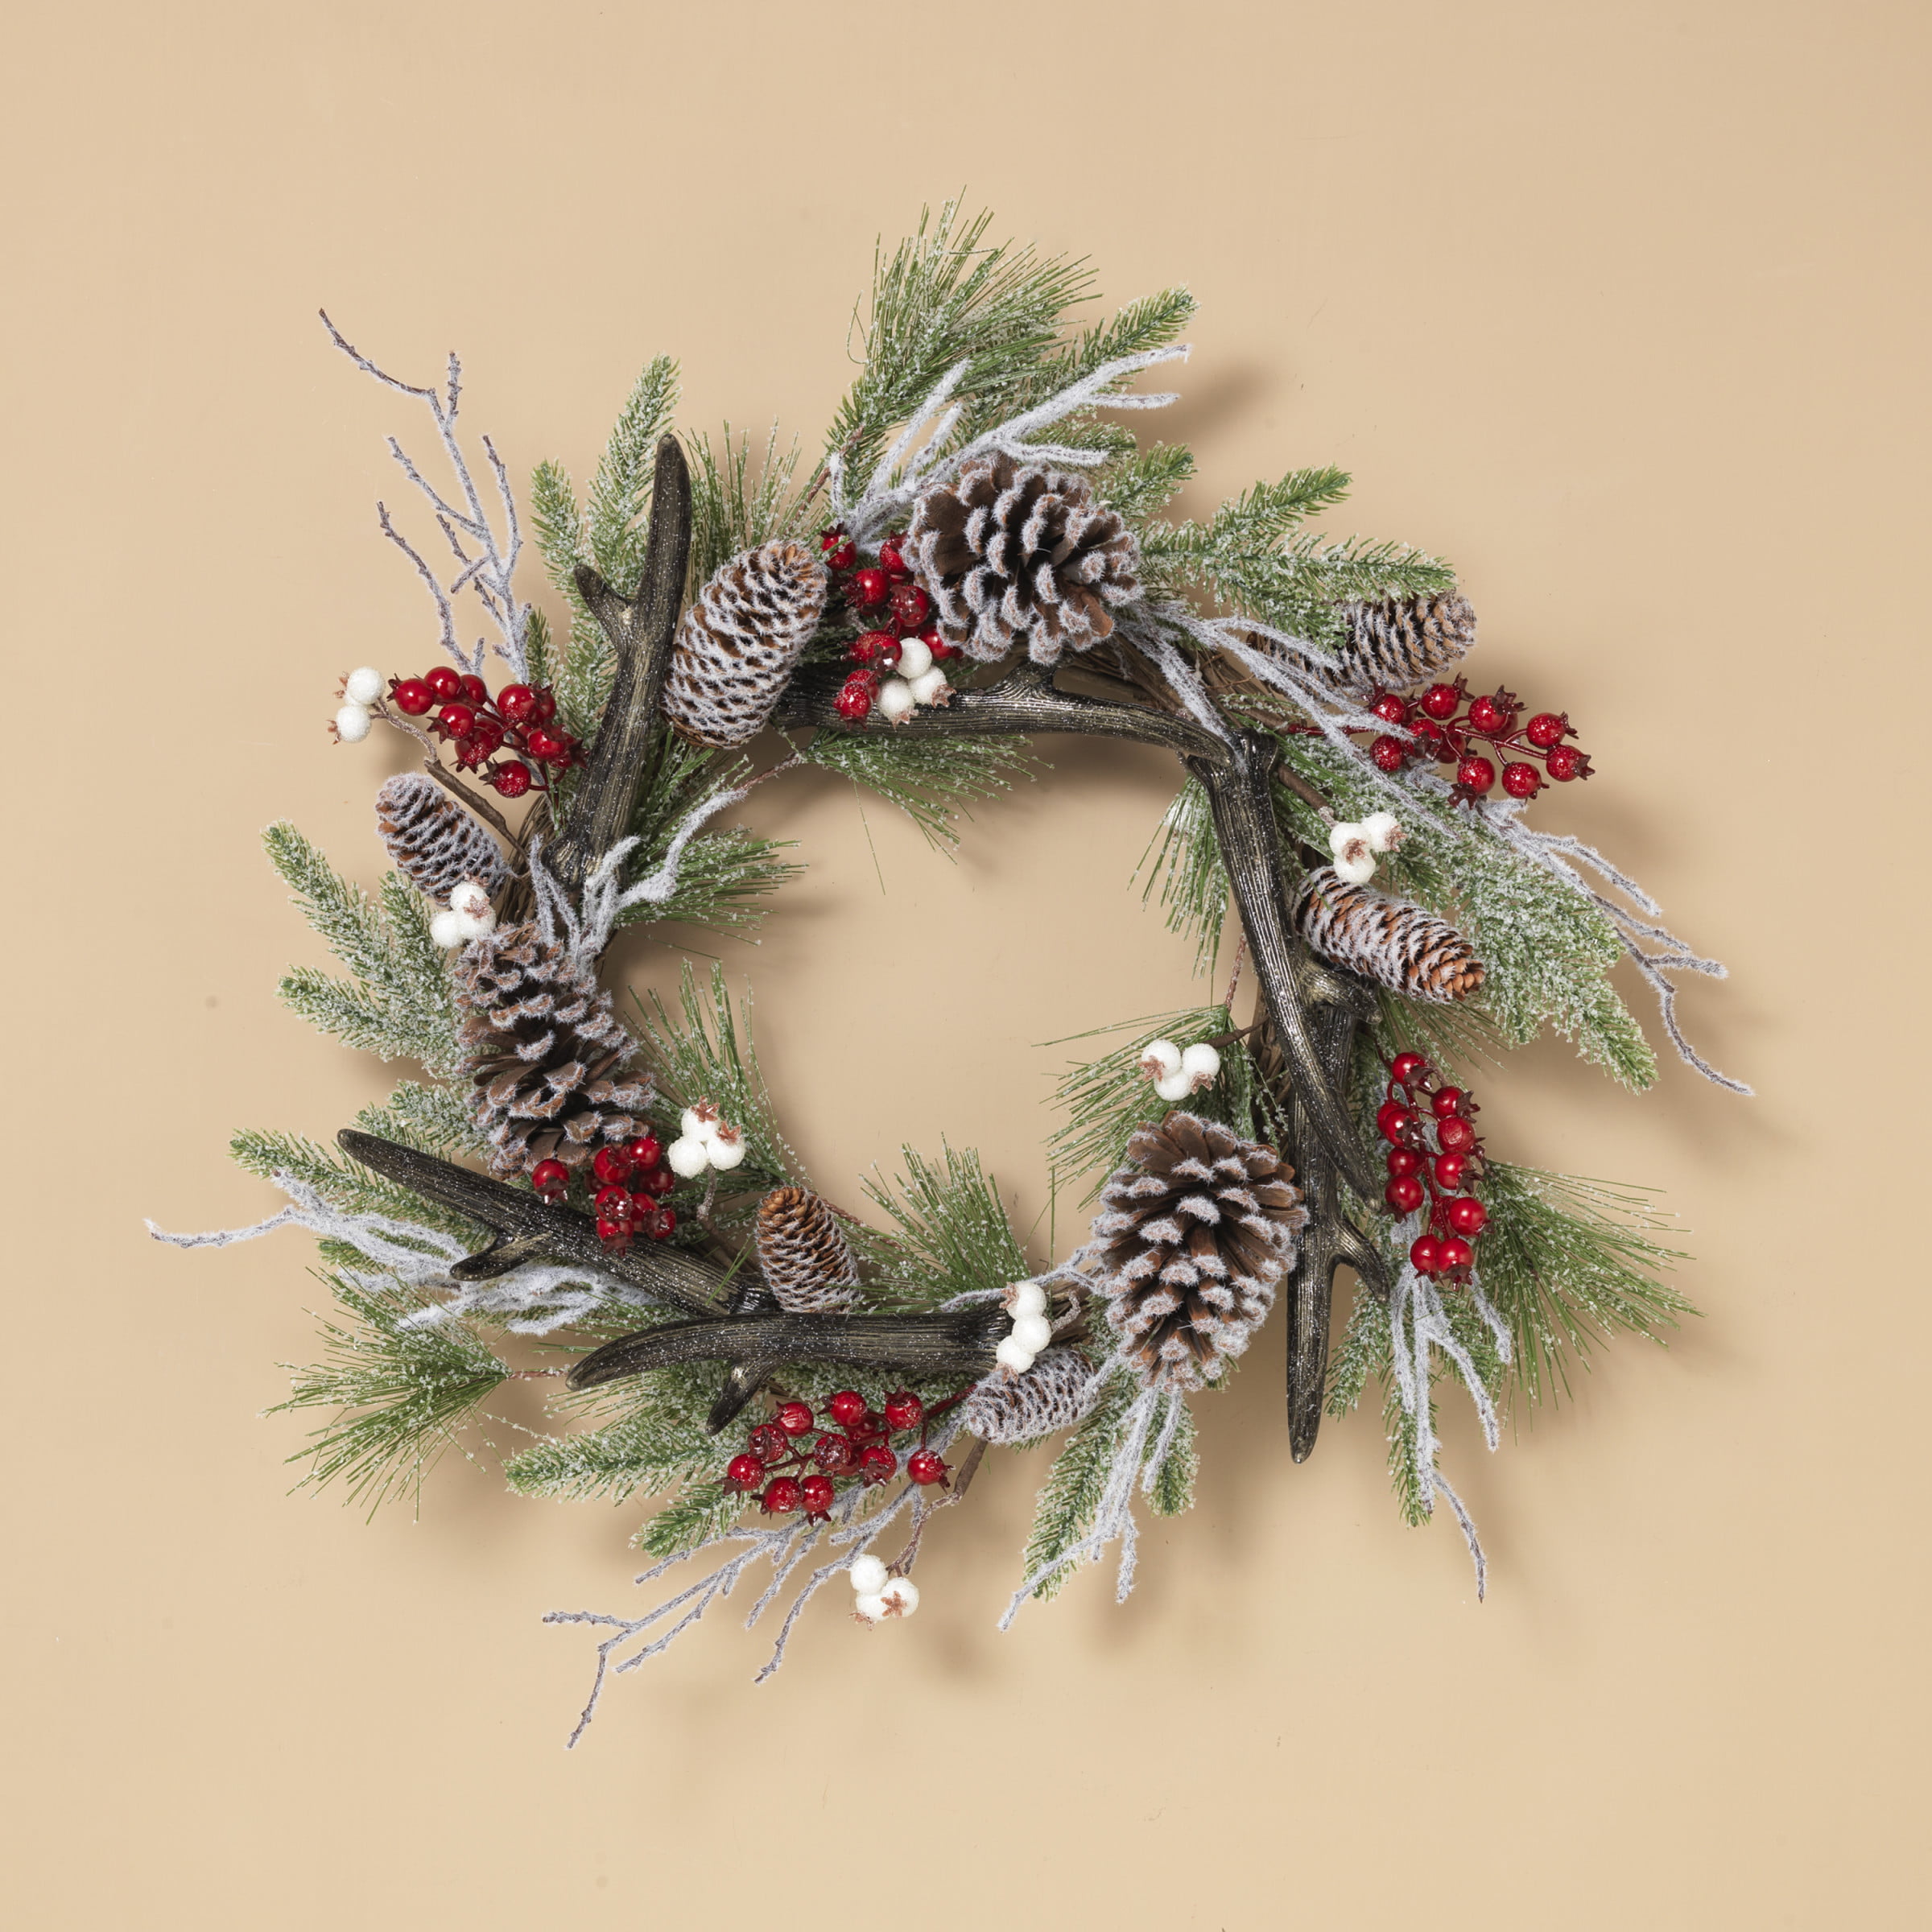 Frosted Pine Wreath With Pine Cones And Berries Christmas Holiday Decoration